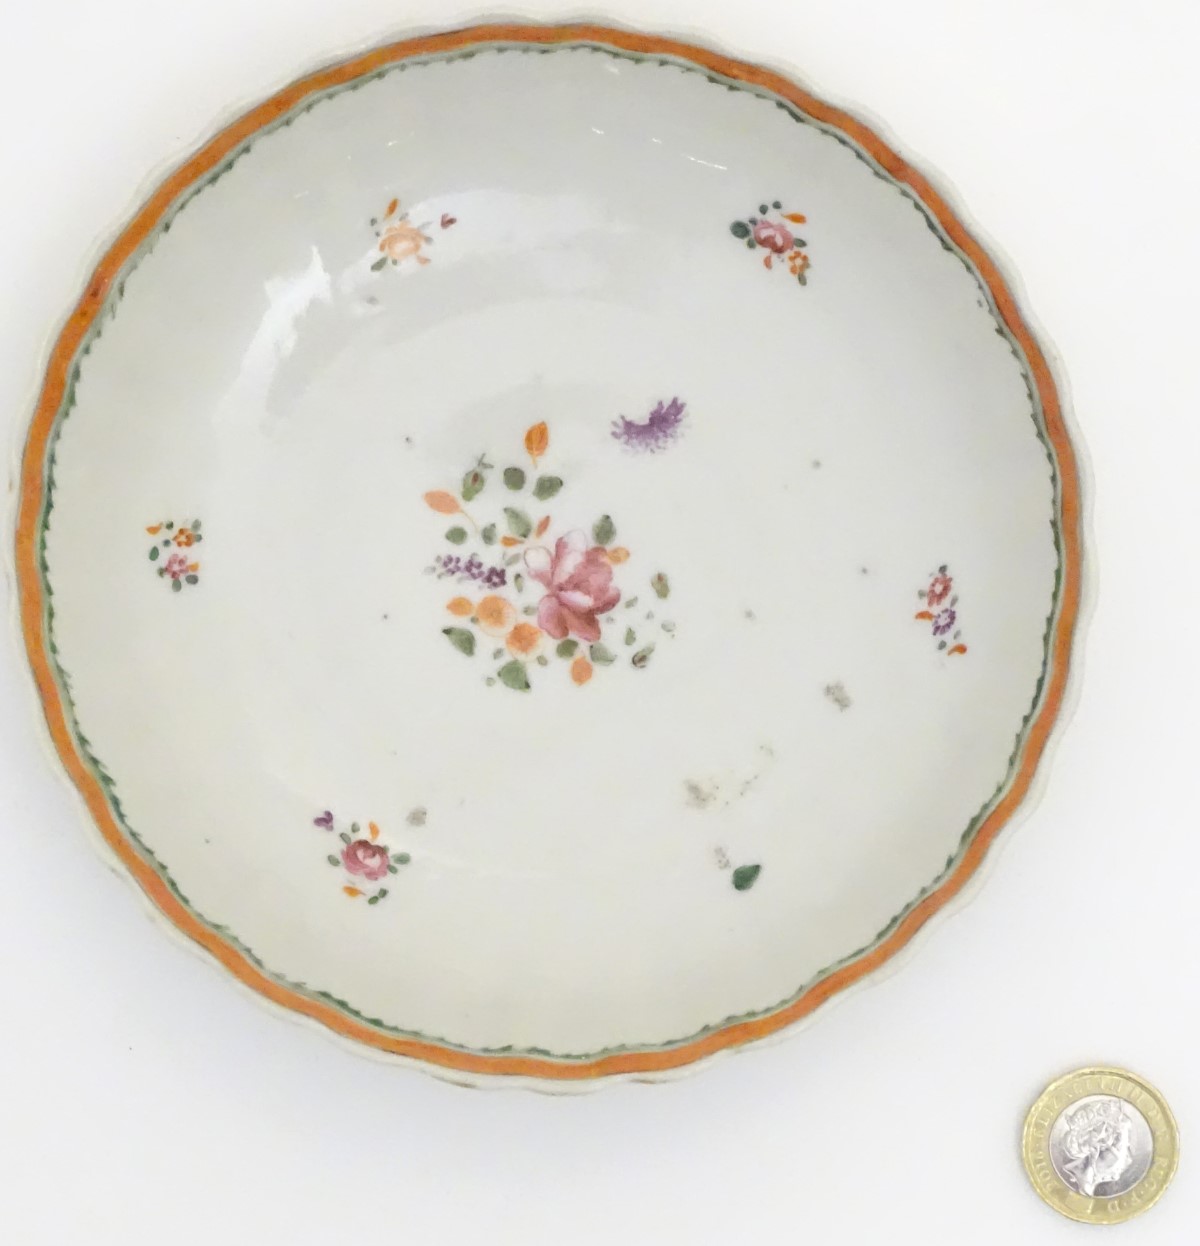 A scallop edge dish with hand painted floral decoration. Approx. 6" diameter. - Image 2 of 8